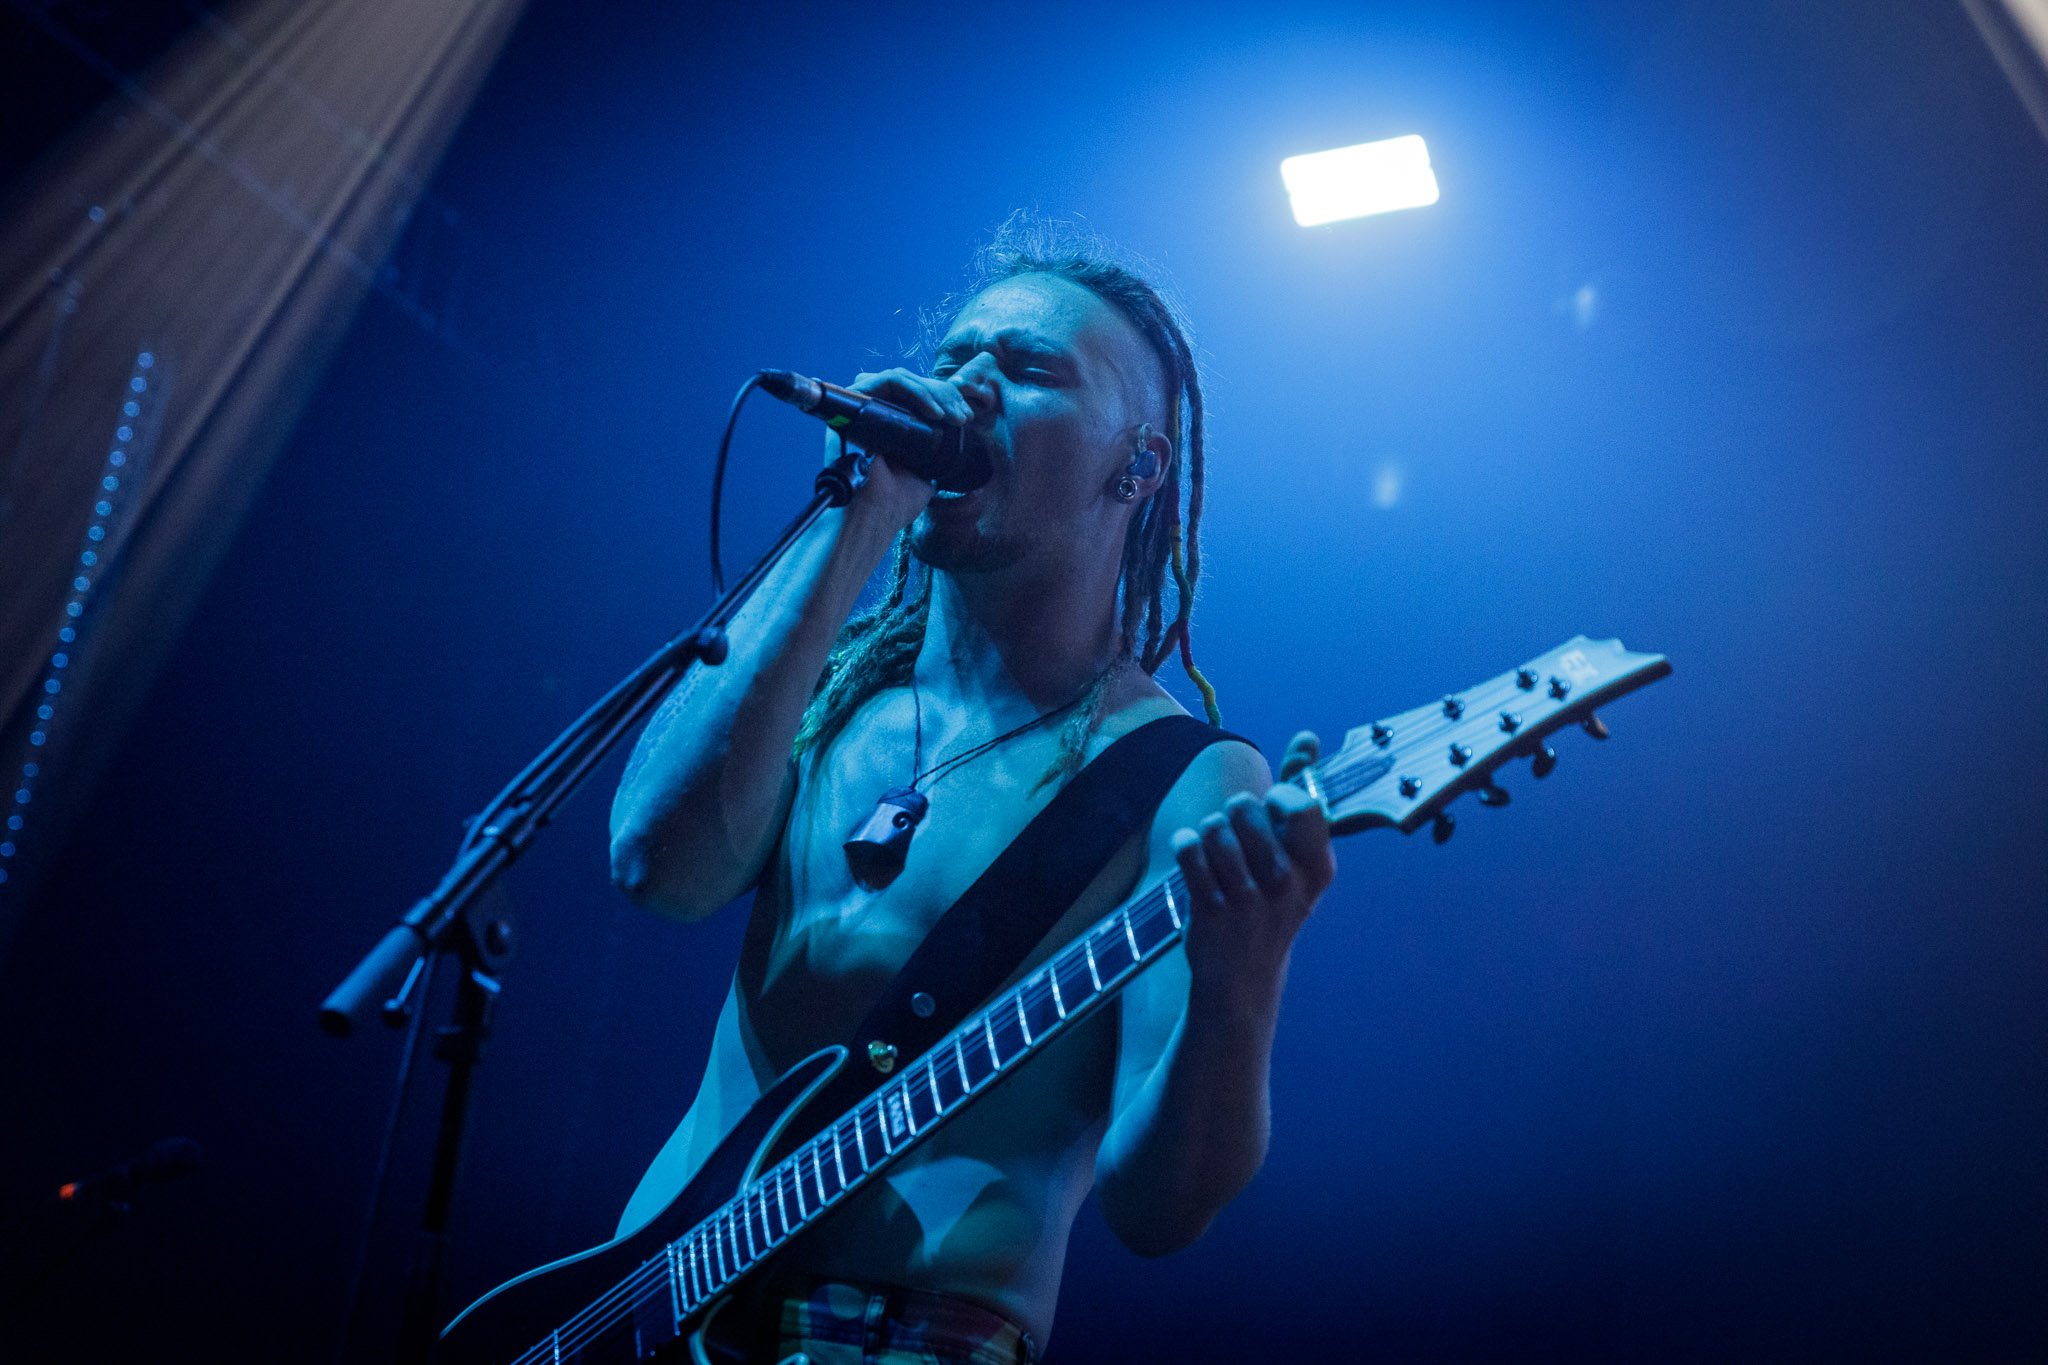 Alien Weaponry at the O2 Victoria Warehouse in Manchester on Feb